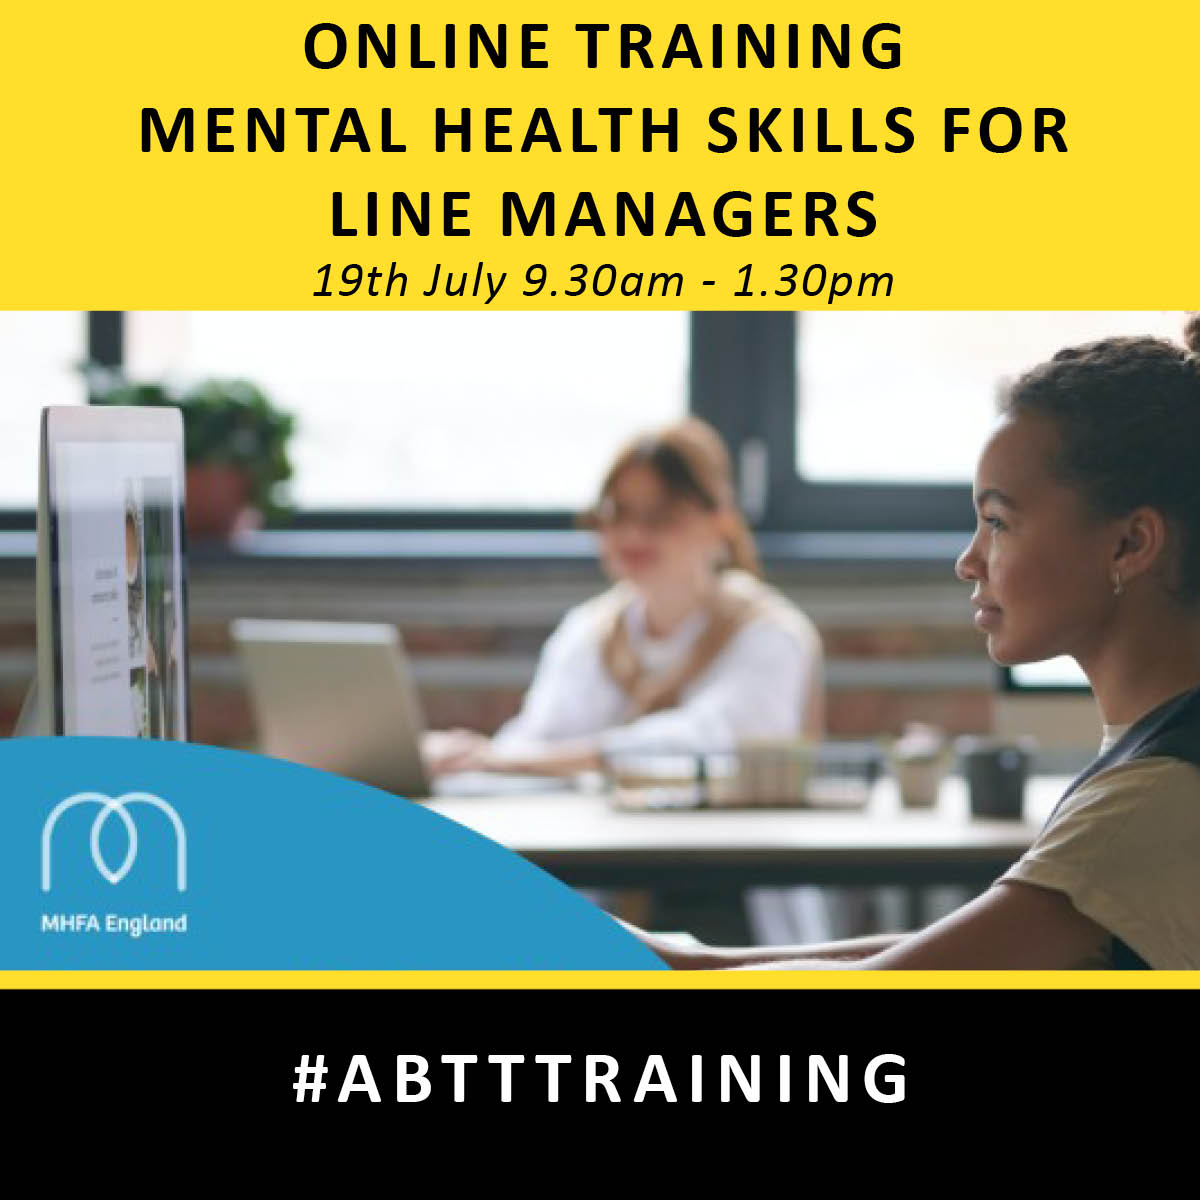 Help those around you this #MentalHealthAwarenessMonth. Our new 'Mental Health Skills for Line Managers' online course in now booking. This is an online training course 19th July 19:30am – 1:30pm. Find out more here: abtt.org.uk/events/abtt-on… #ABTTtraining #MentalHealth #MHFA